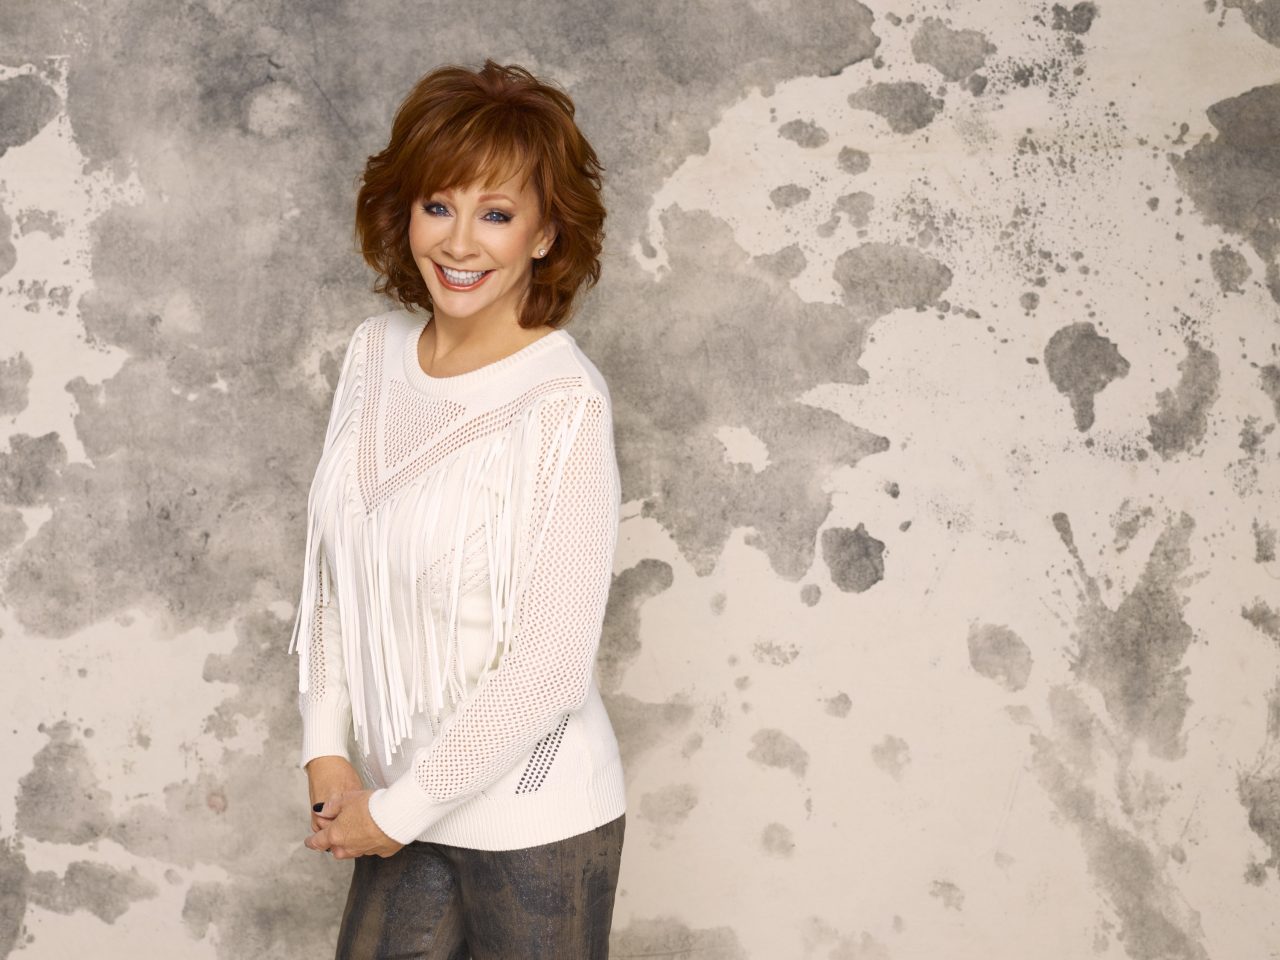 Reba McEntire to Share 'Wit and Wisdom' on New Spotify Podcast Sounds ...